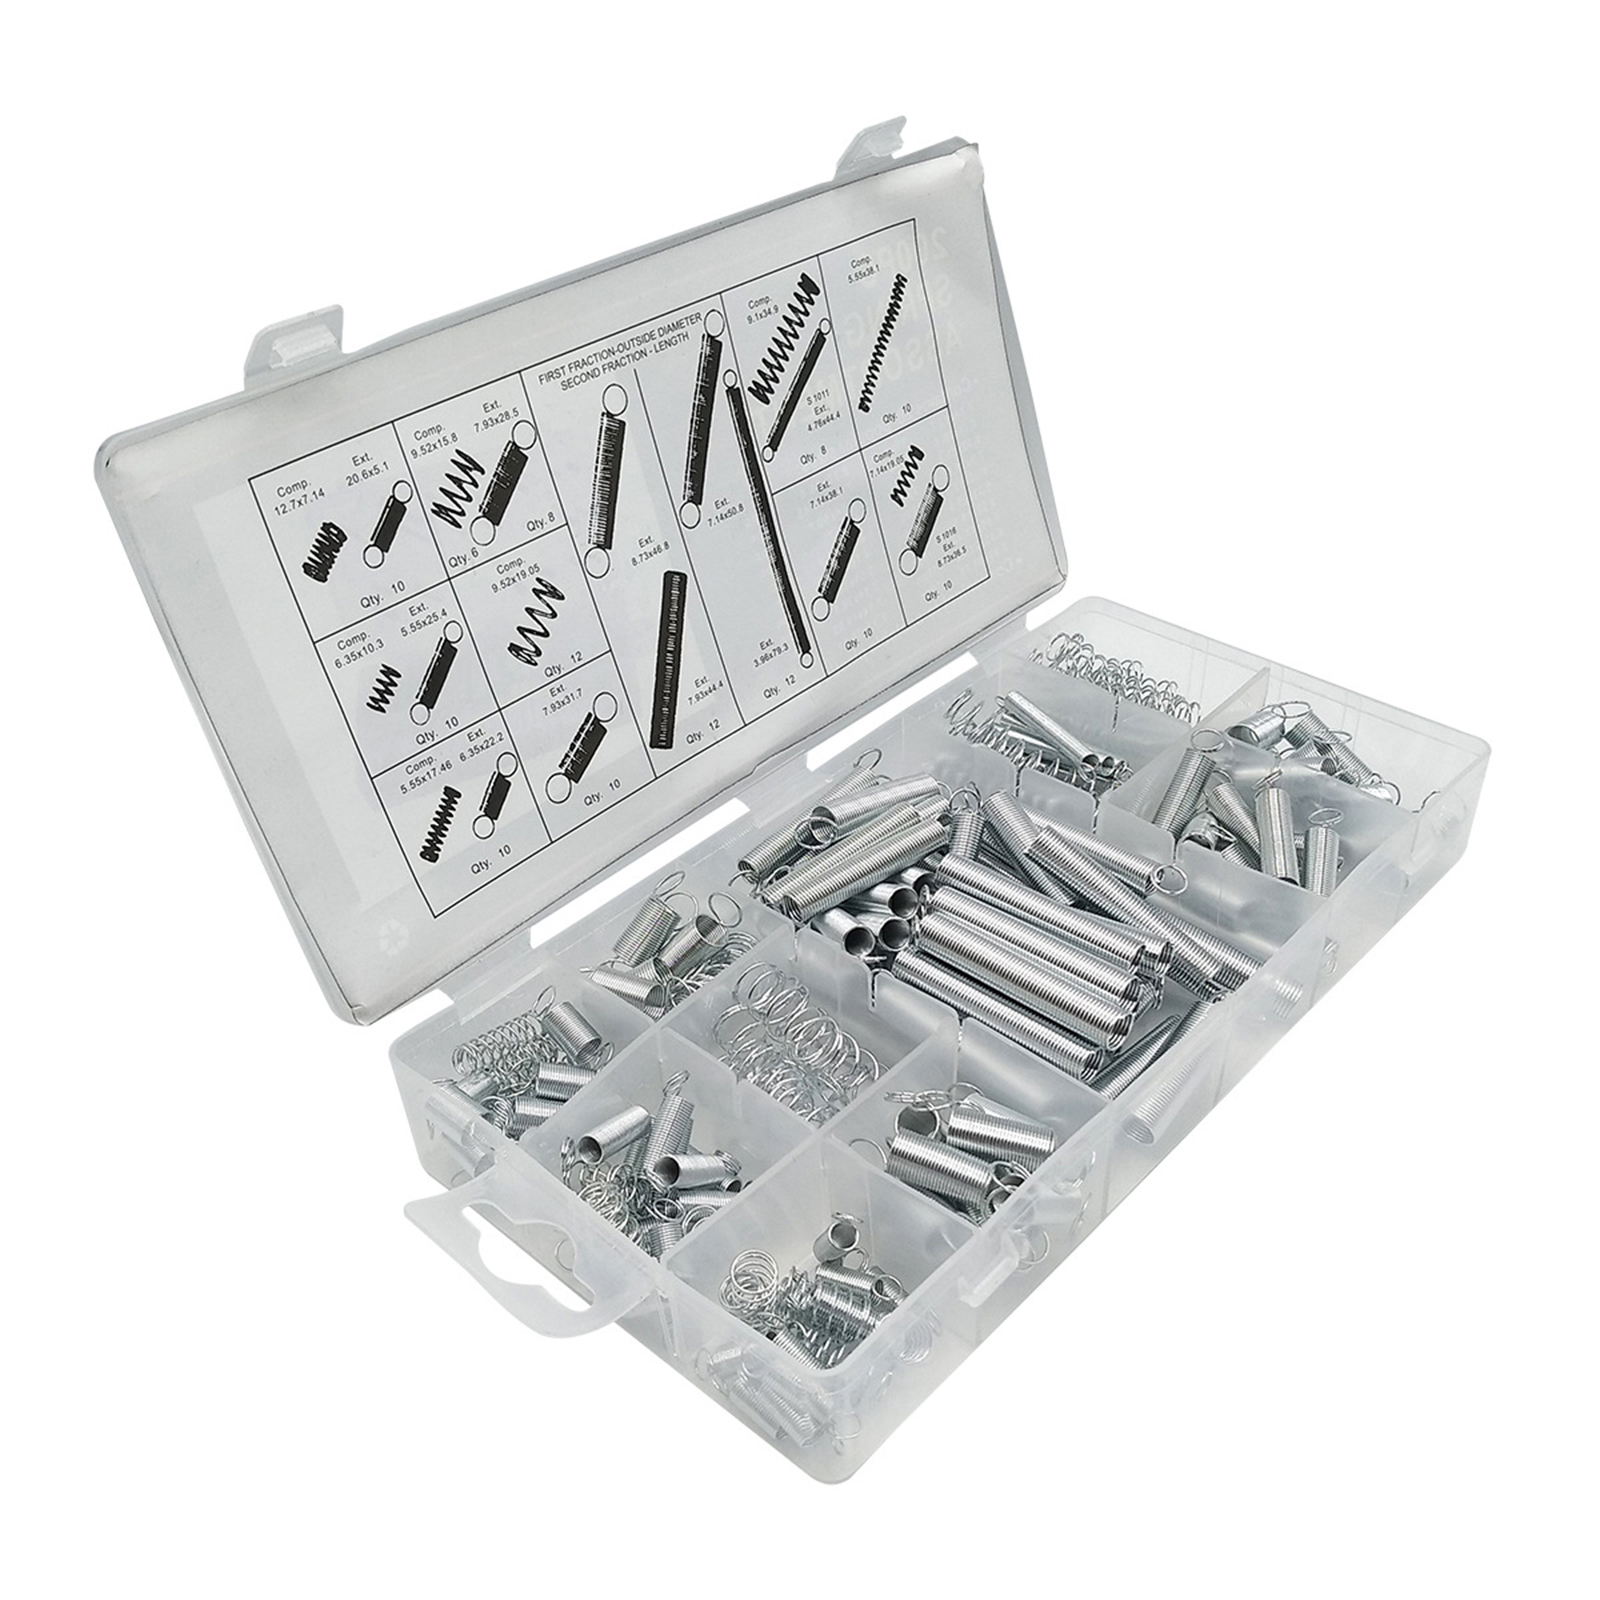 200pcs Compression Extension Spring Assortment Set Steel Metal Tension Springs Replacement Kit